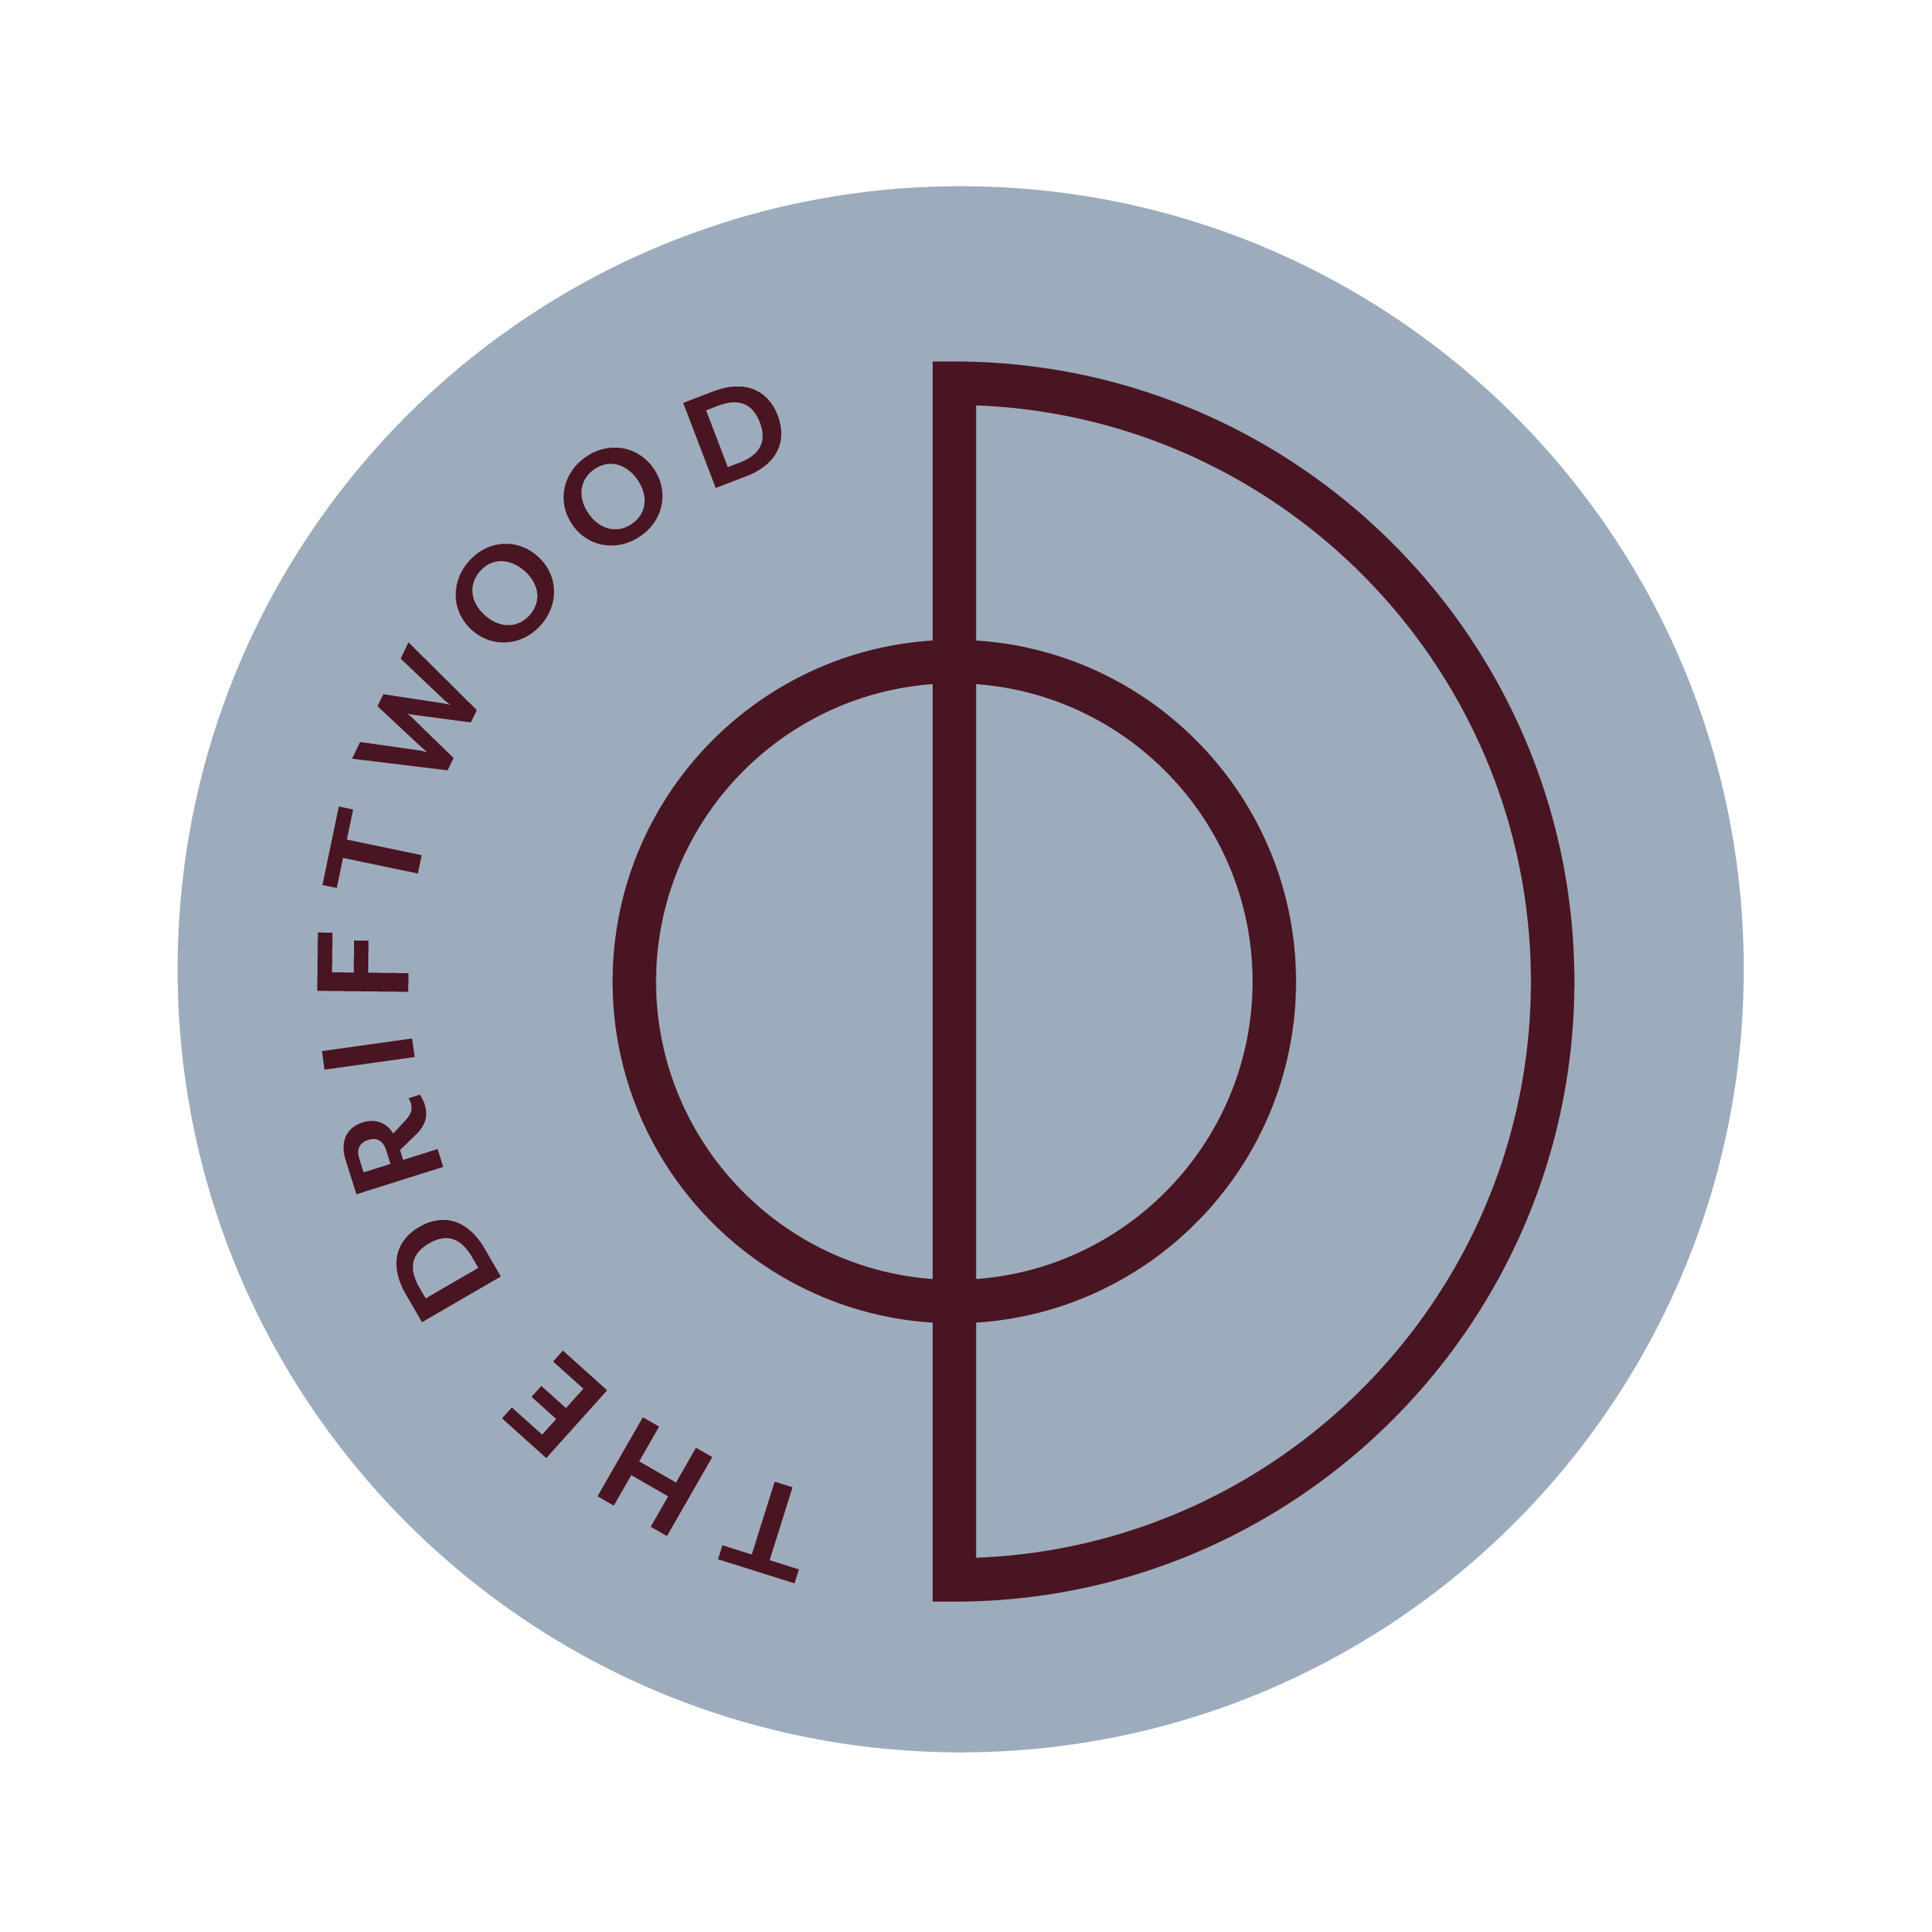 An image labelled The Driftwood Logo